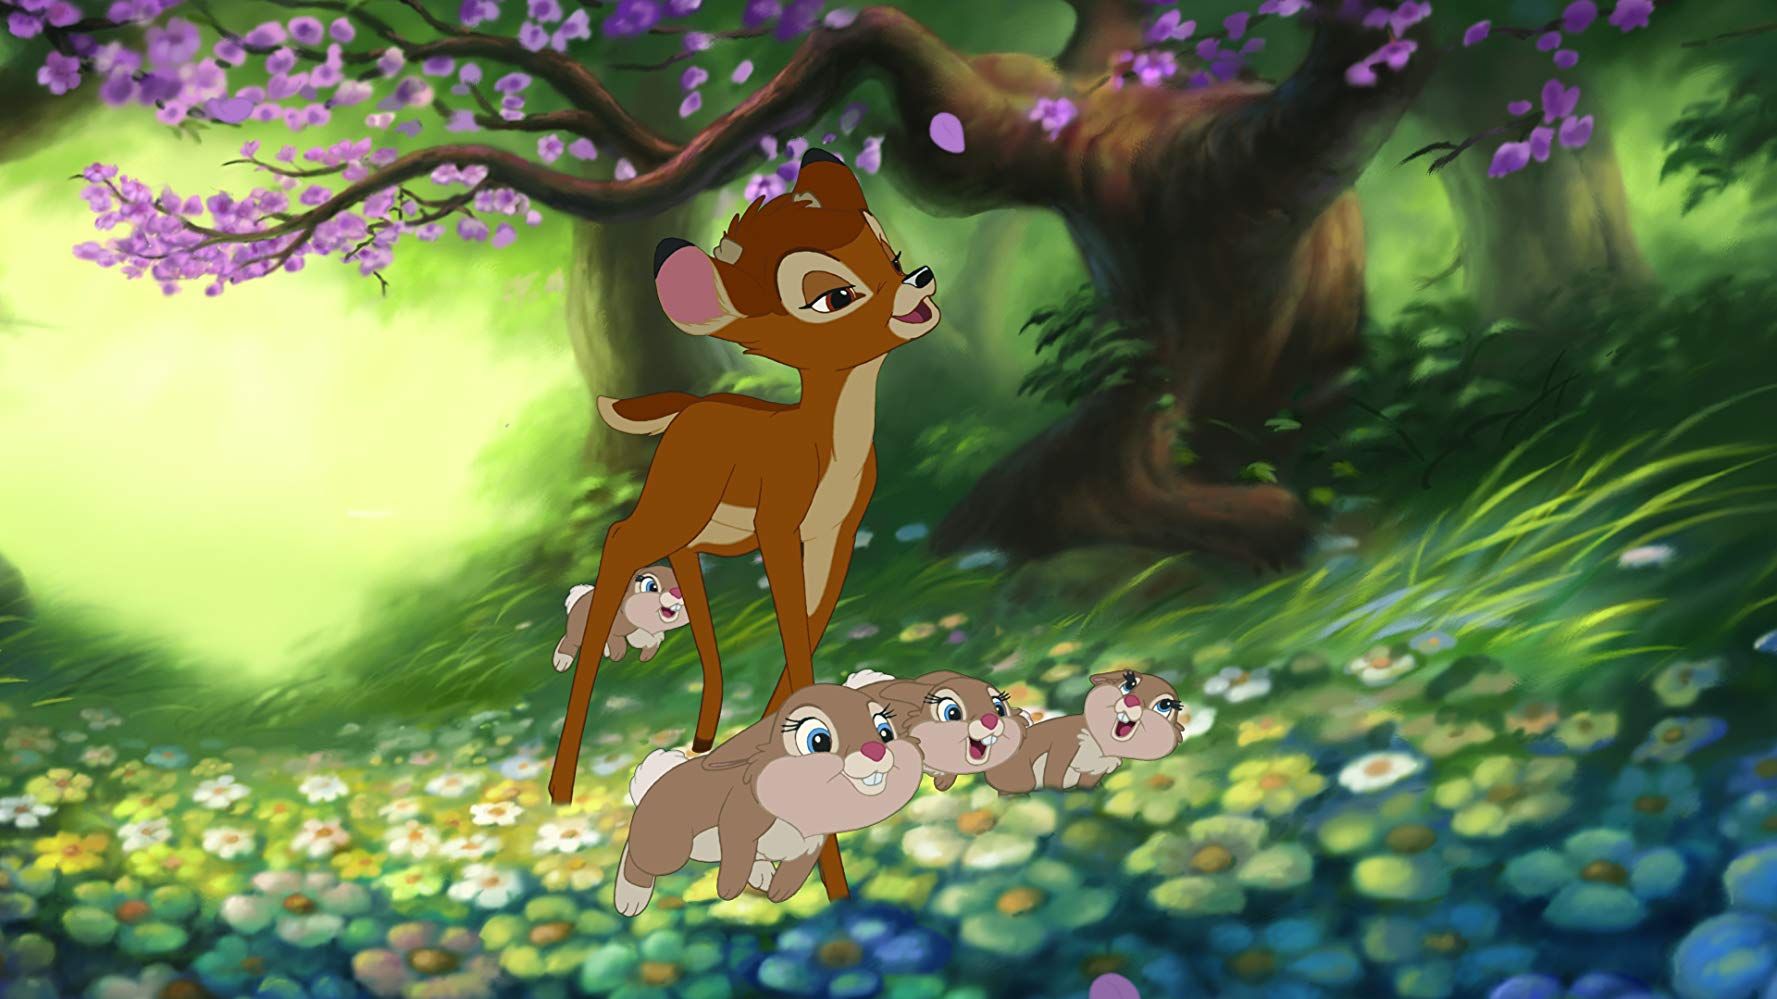 Bambi horror movie will turn the deer into a 